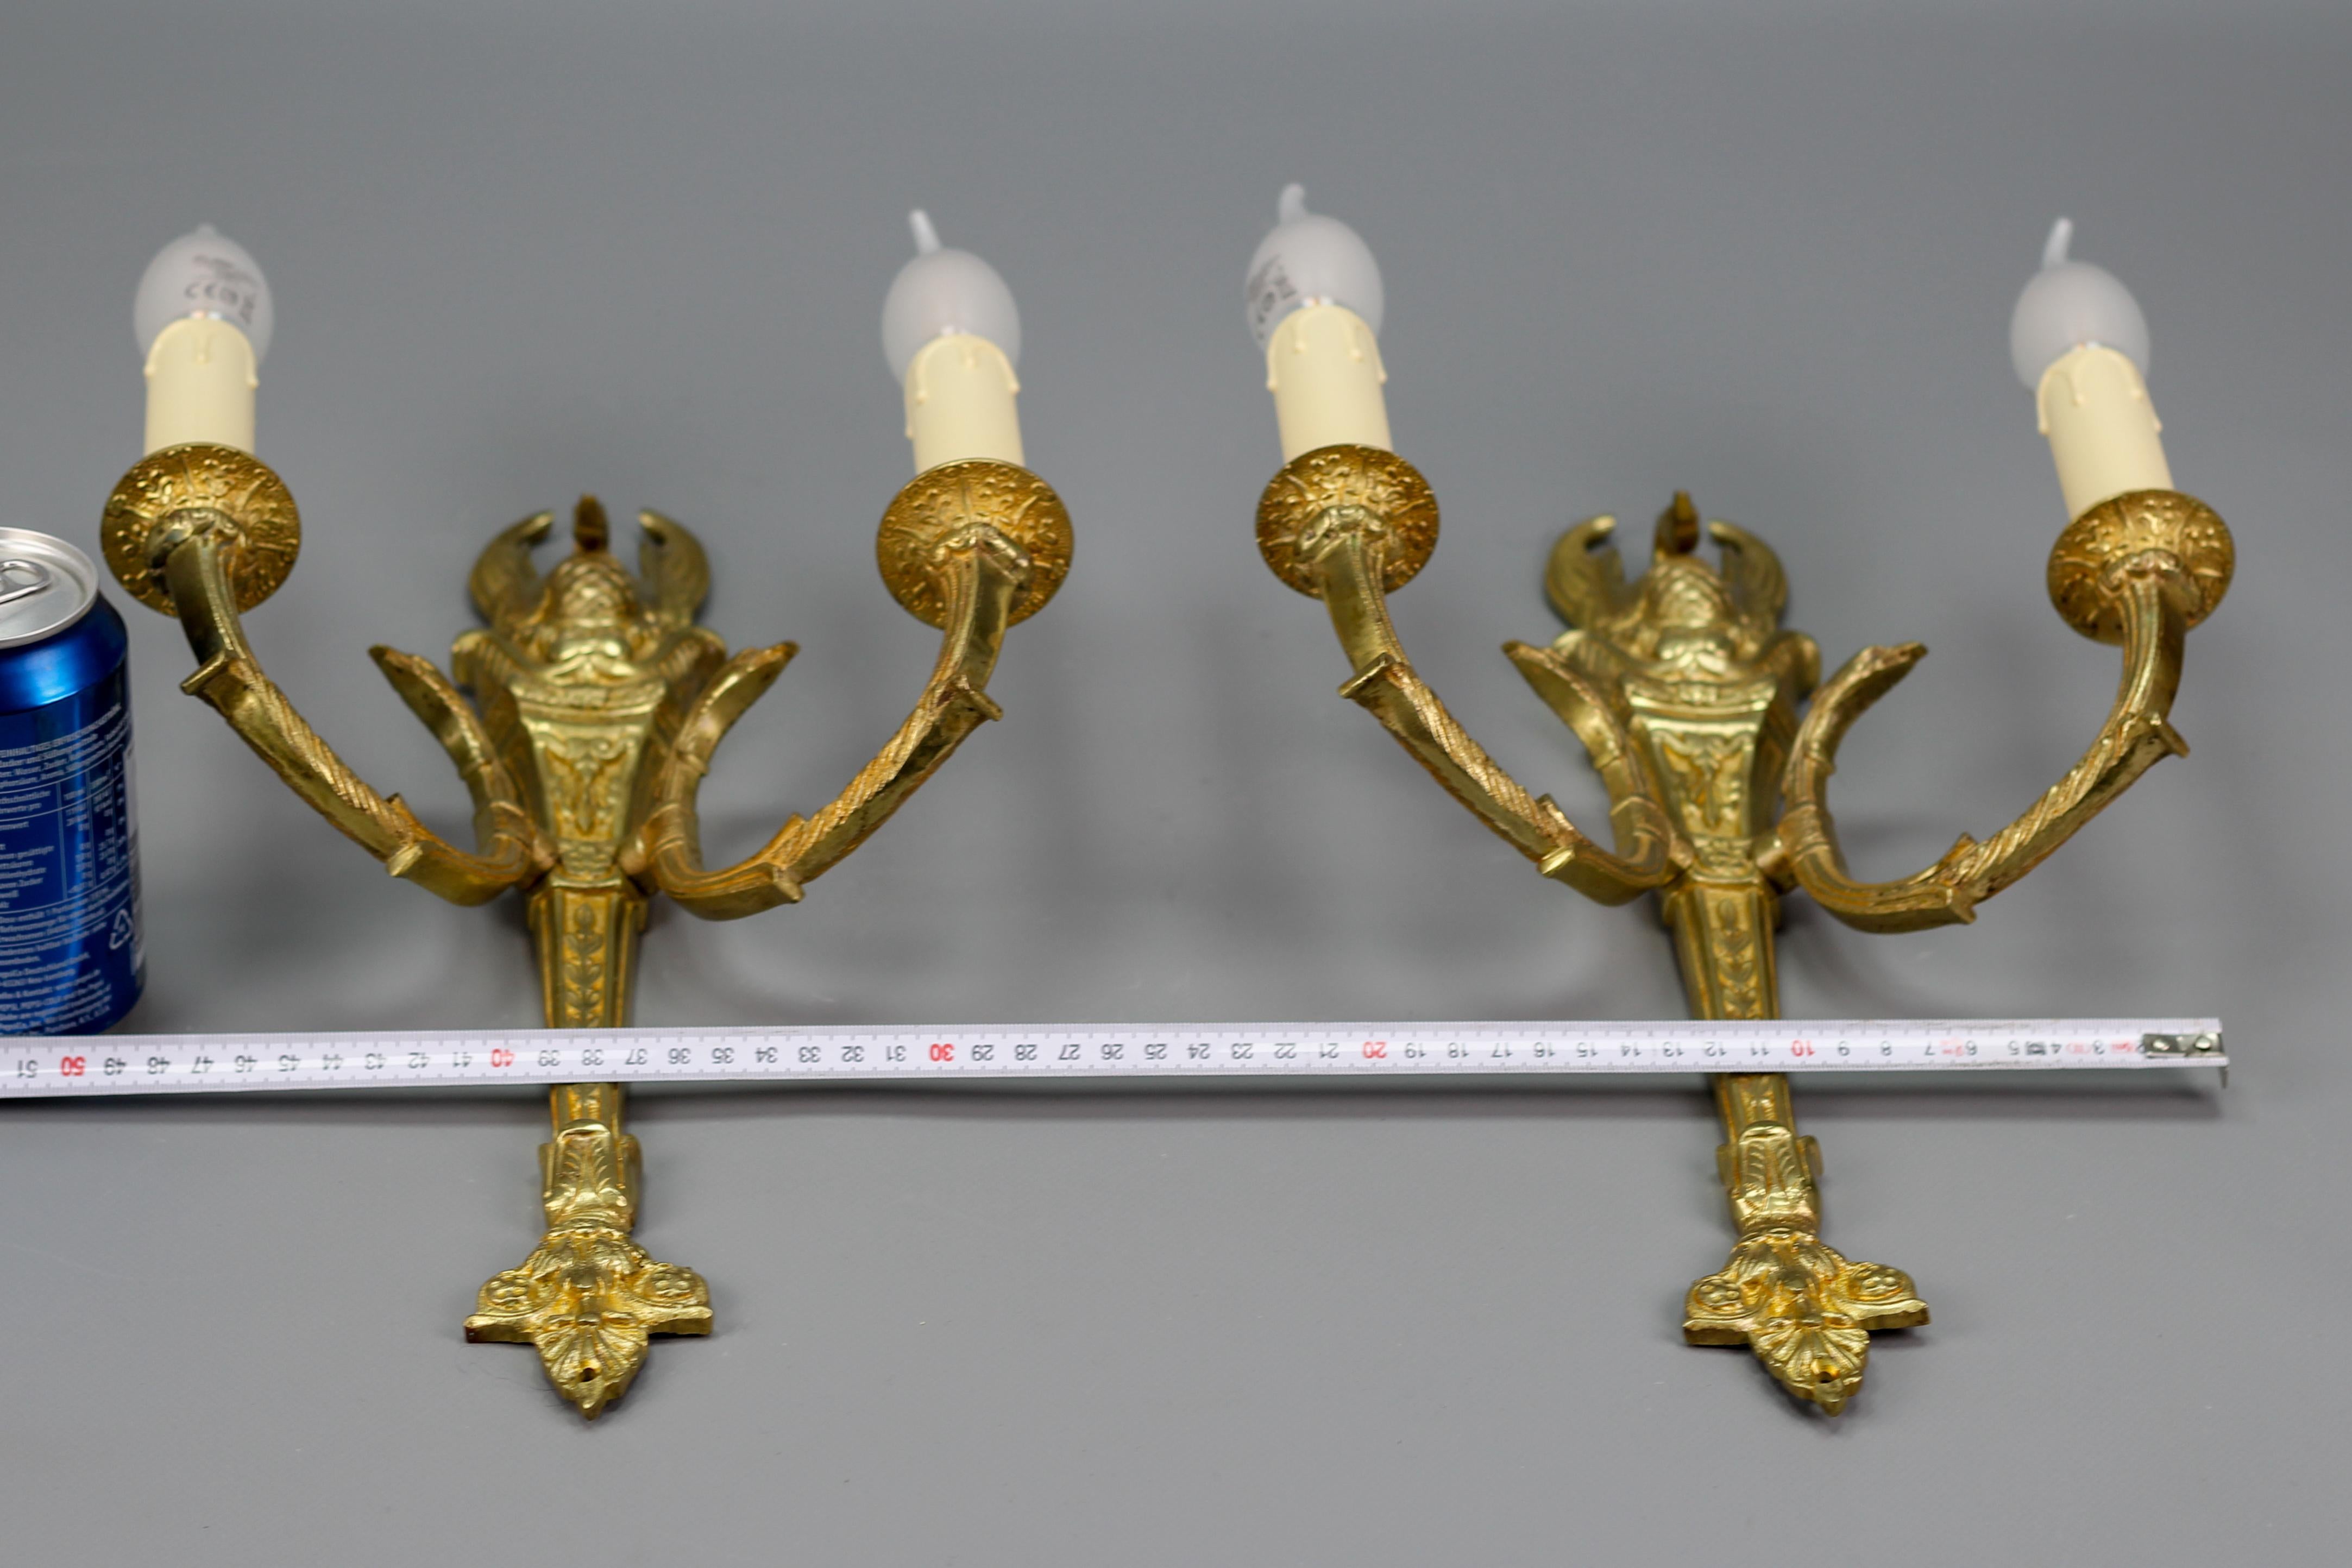 Pair of French Empire Style Gilt Bronze Two-Light Sconces, Early 20th Century For Sale 7